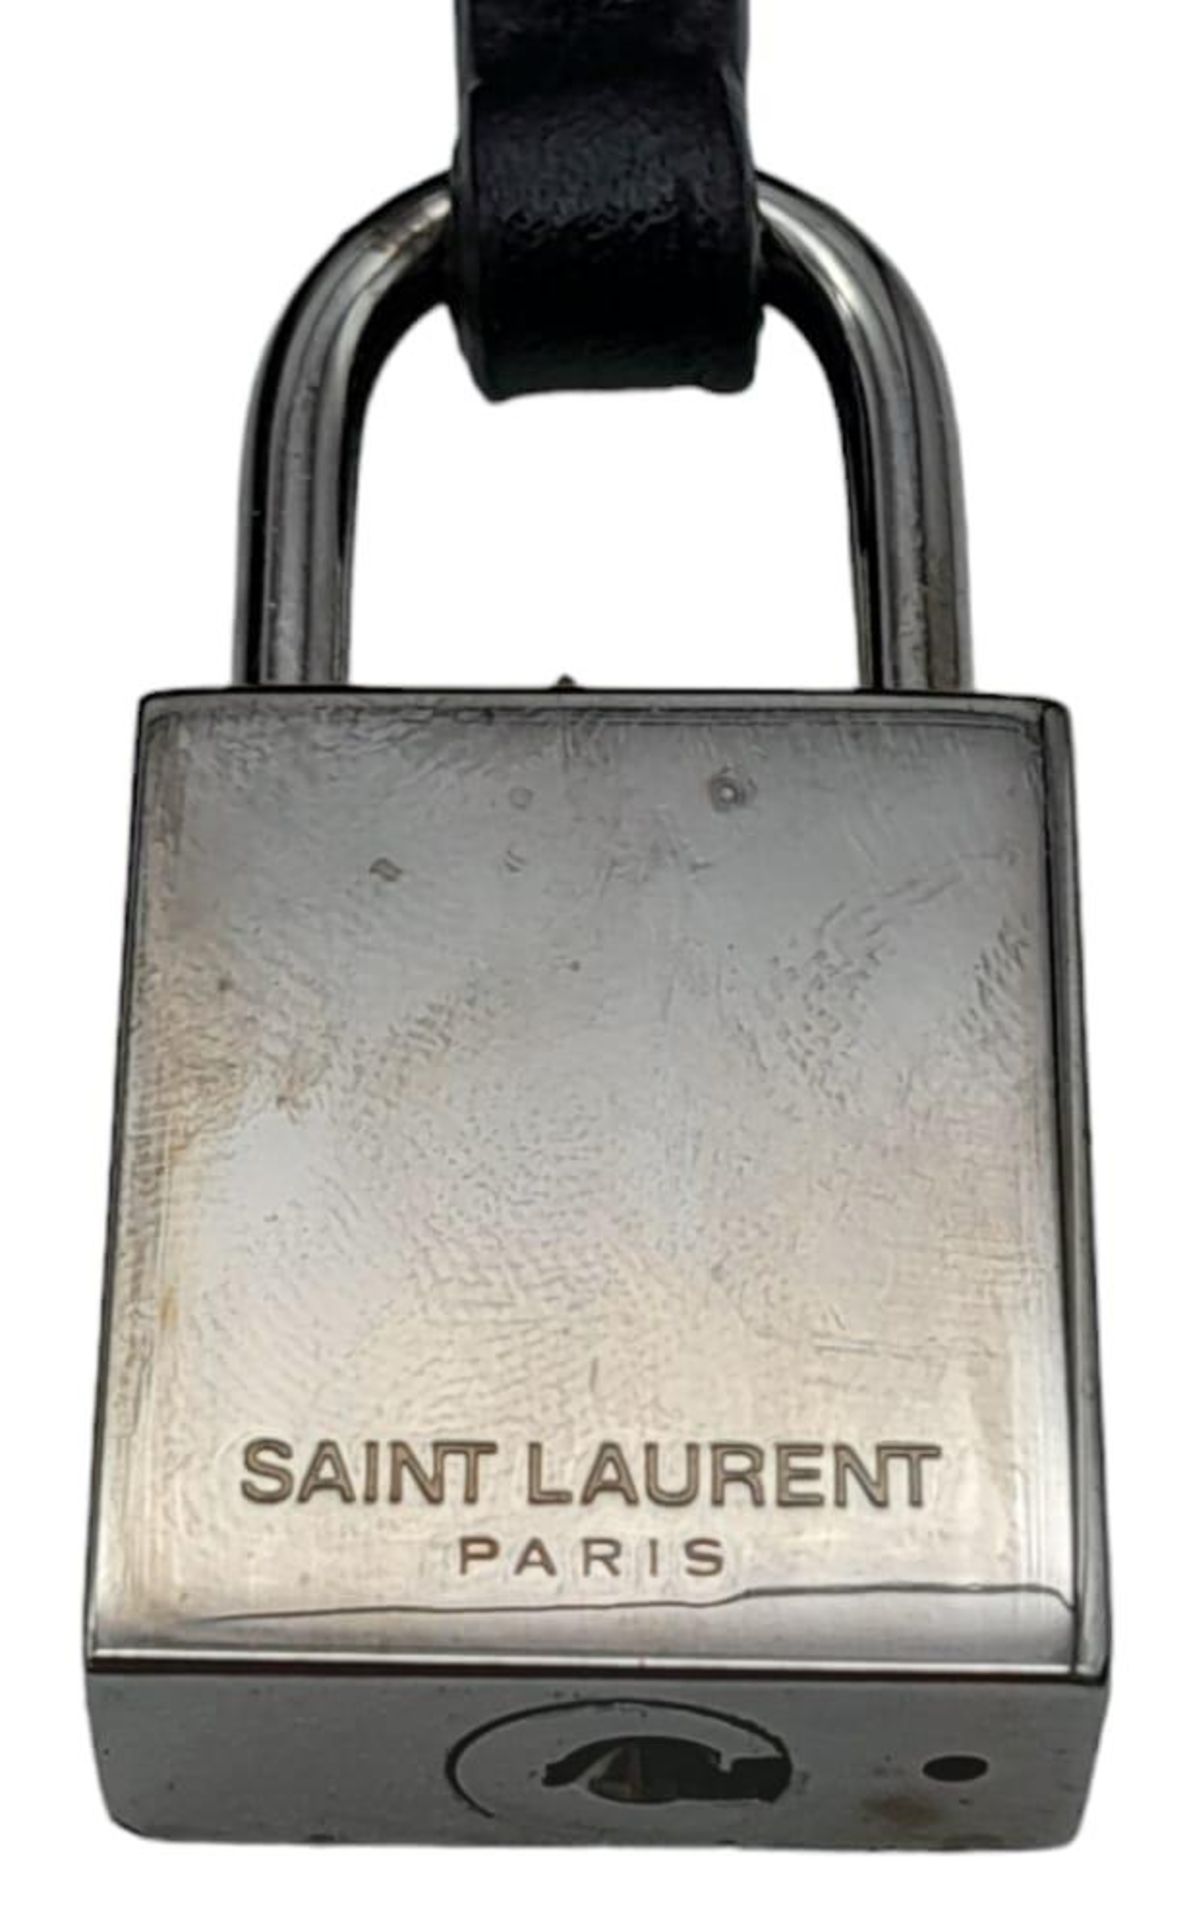 A Saint Laurent Sac de Jour Handbag. Crocodile embossed leather exterior with silver hardware and - Image 15 of 21